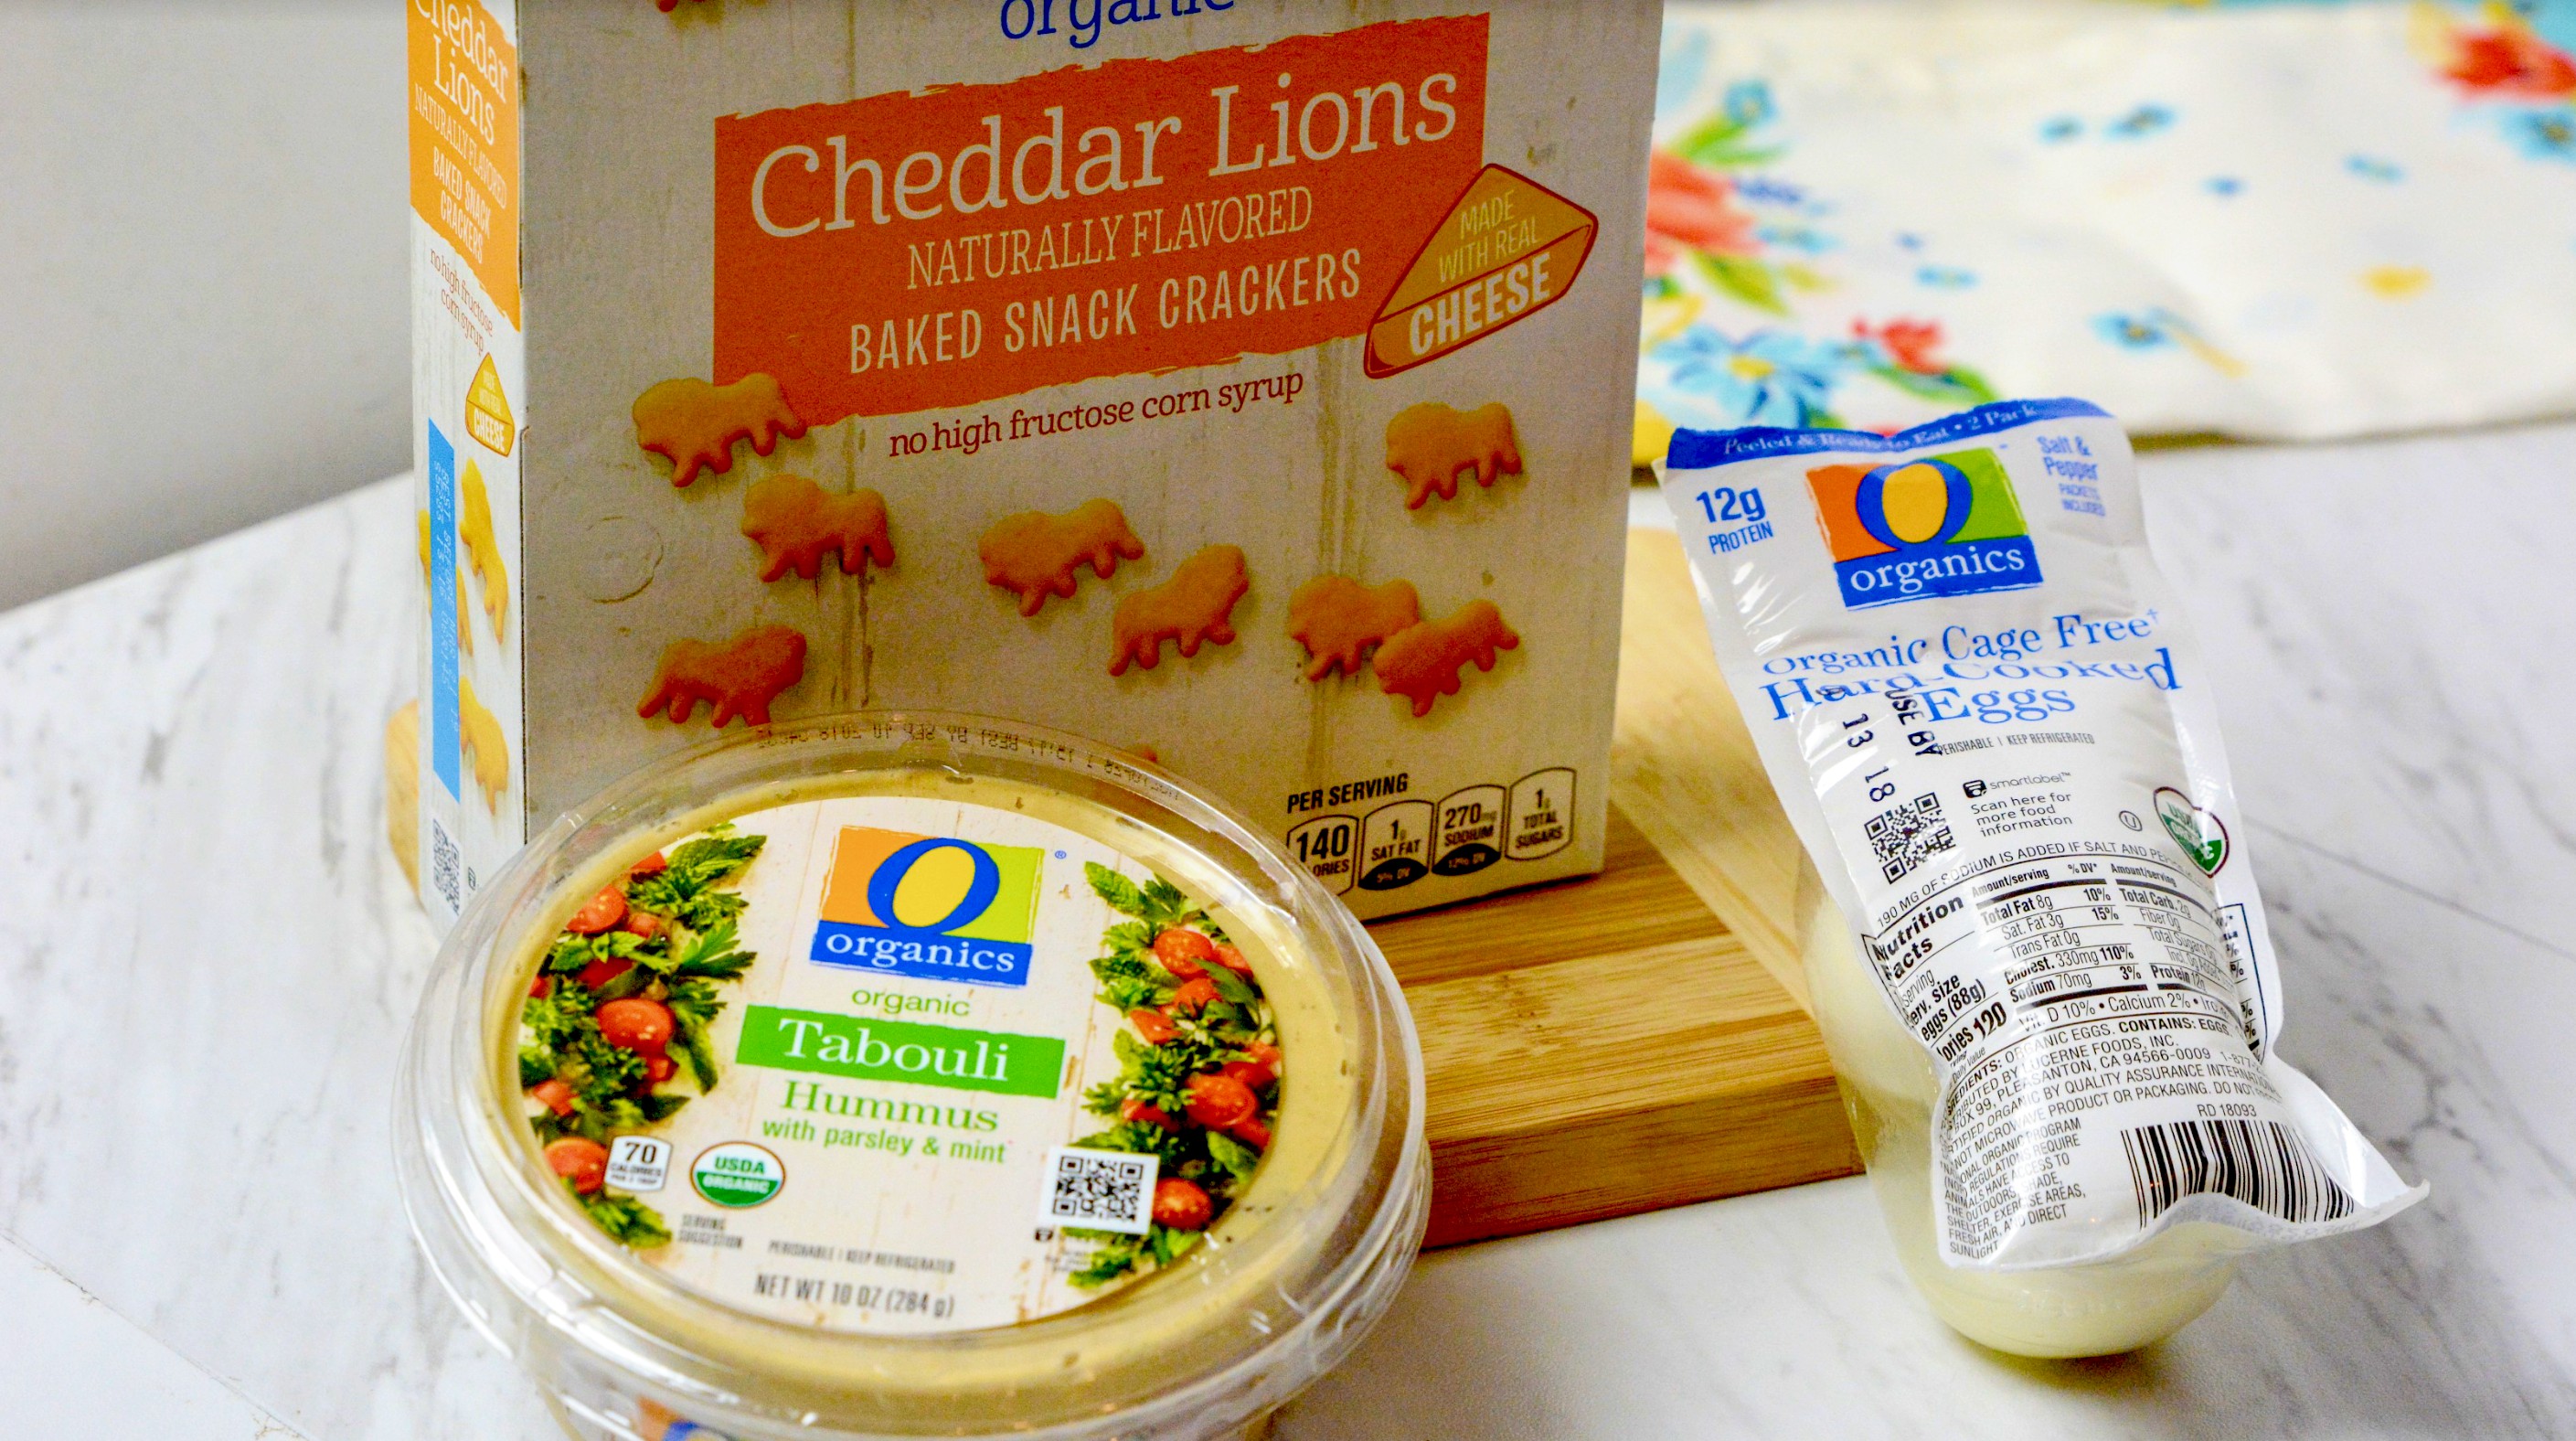 6 Ideas for a Healthy and Delicious Back to School Lunches and After School Snacks with O Organics at Safeway. Read more @ HipMamasPlace.com